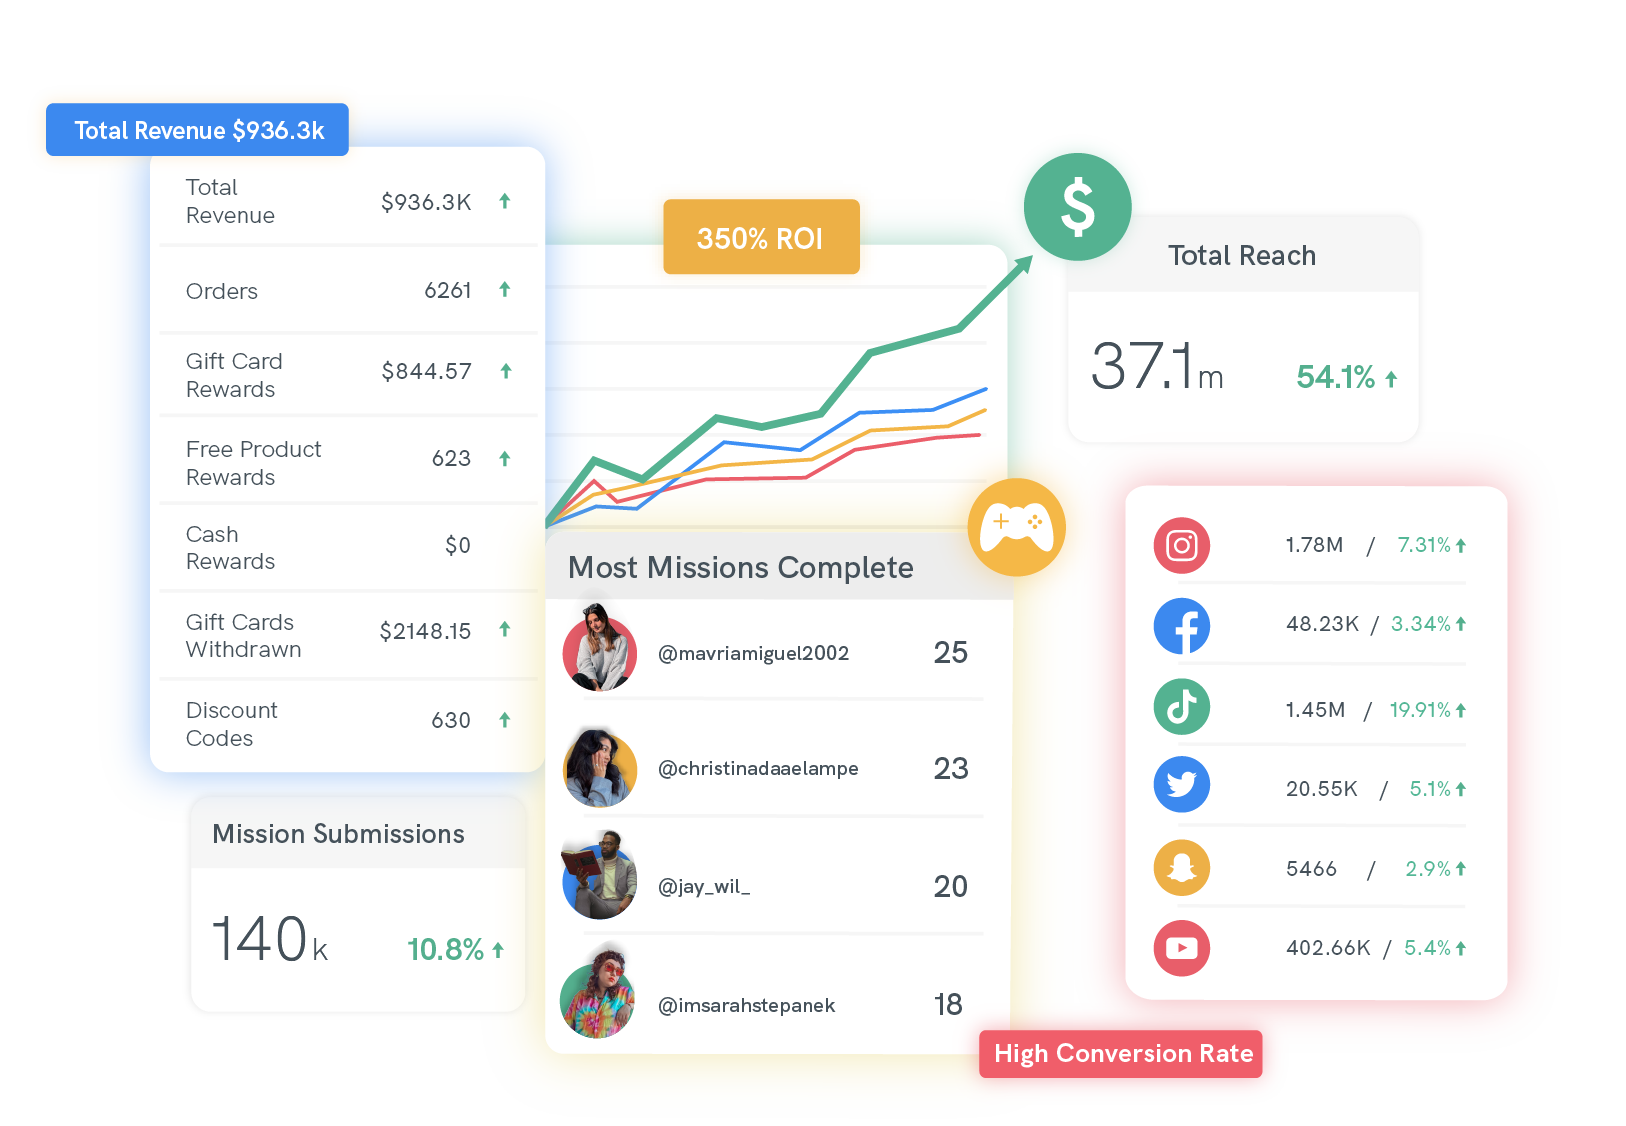 Track your successes to help you replicate them using rich analytics that show your how engaged your ambassadors' audiences are with their content. See your social buzz quantified, demographics, highest-performing ambassadors, and ROI. All in real-time.